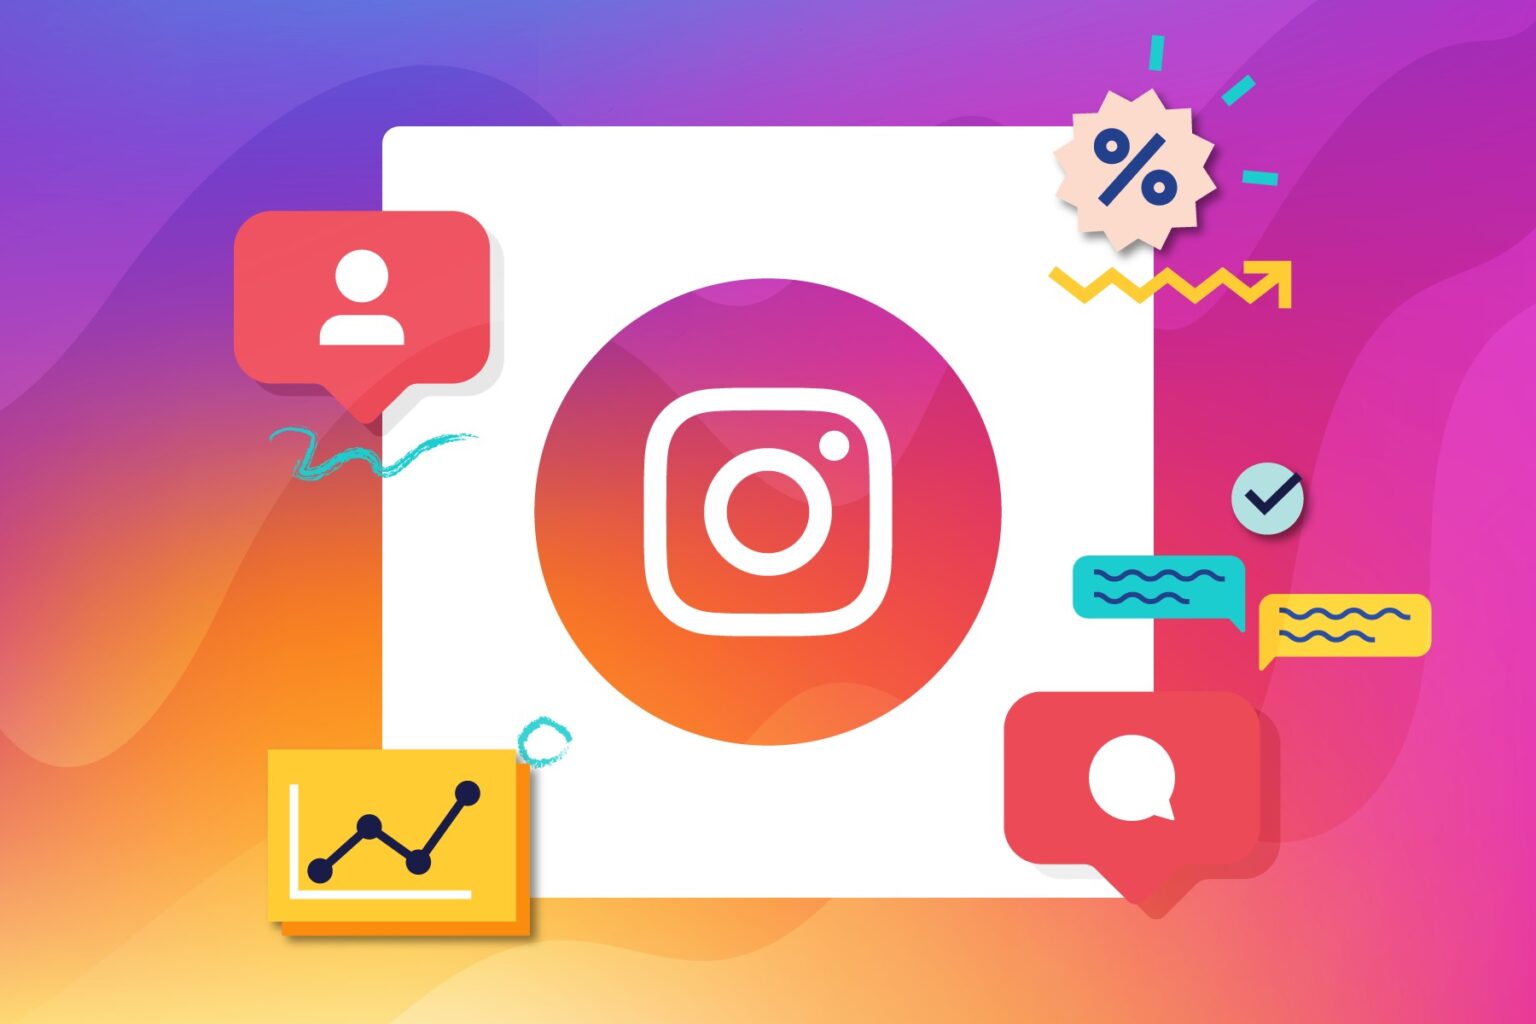 Instagram can be used for business means. Here are some tips on how to improve Instagram post engagement across the board.